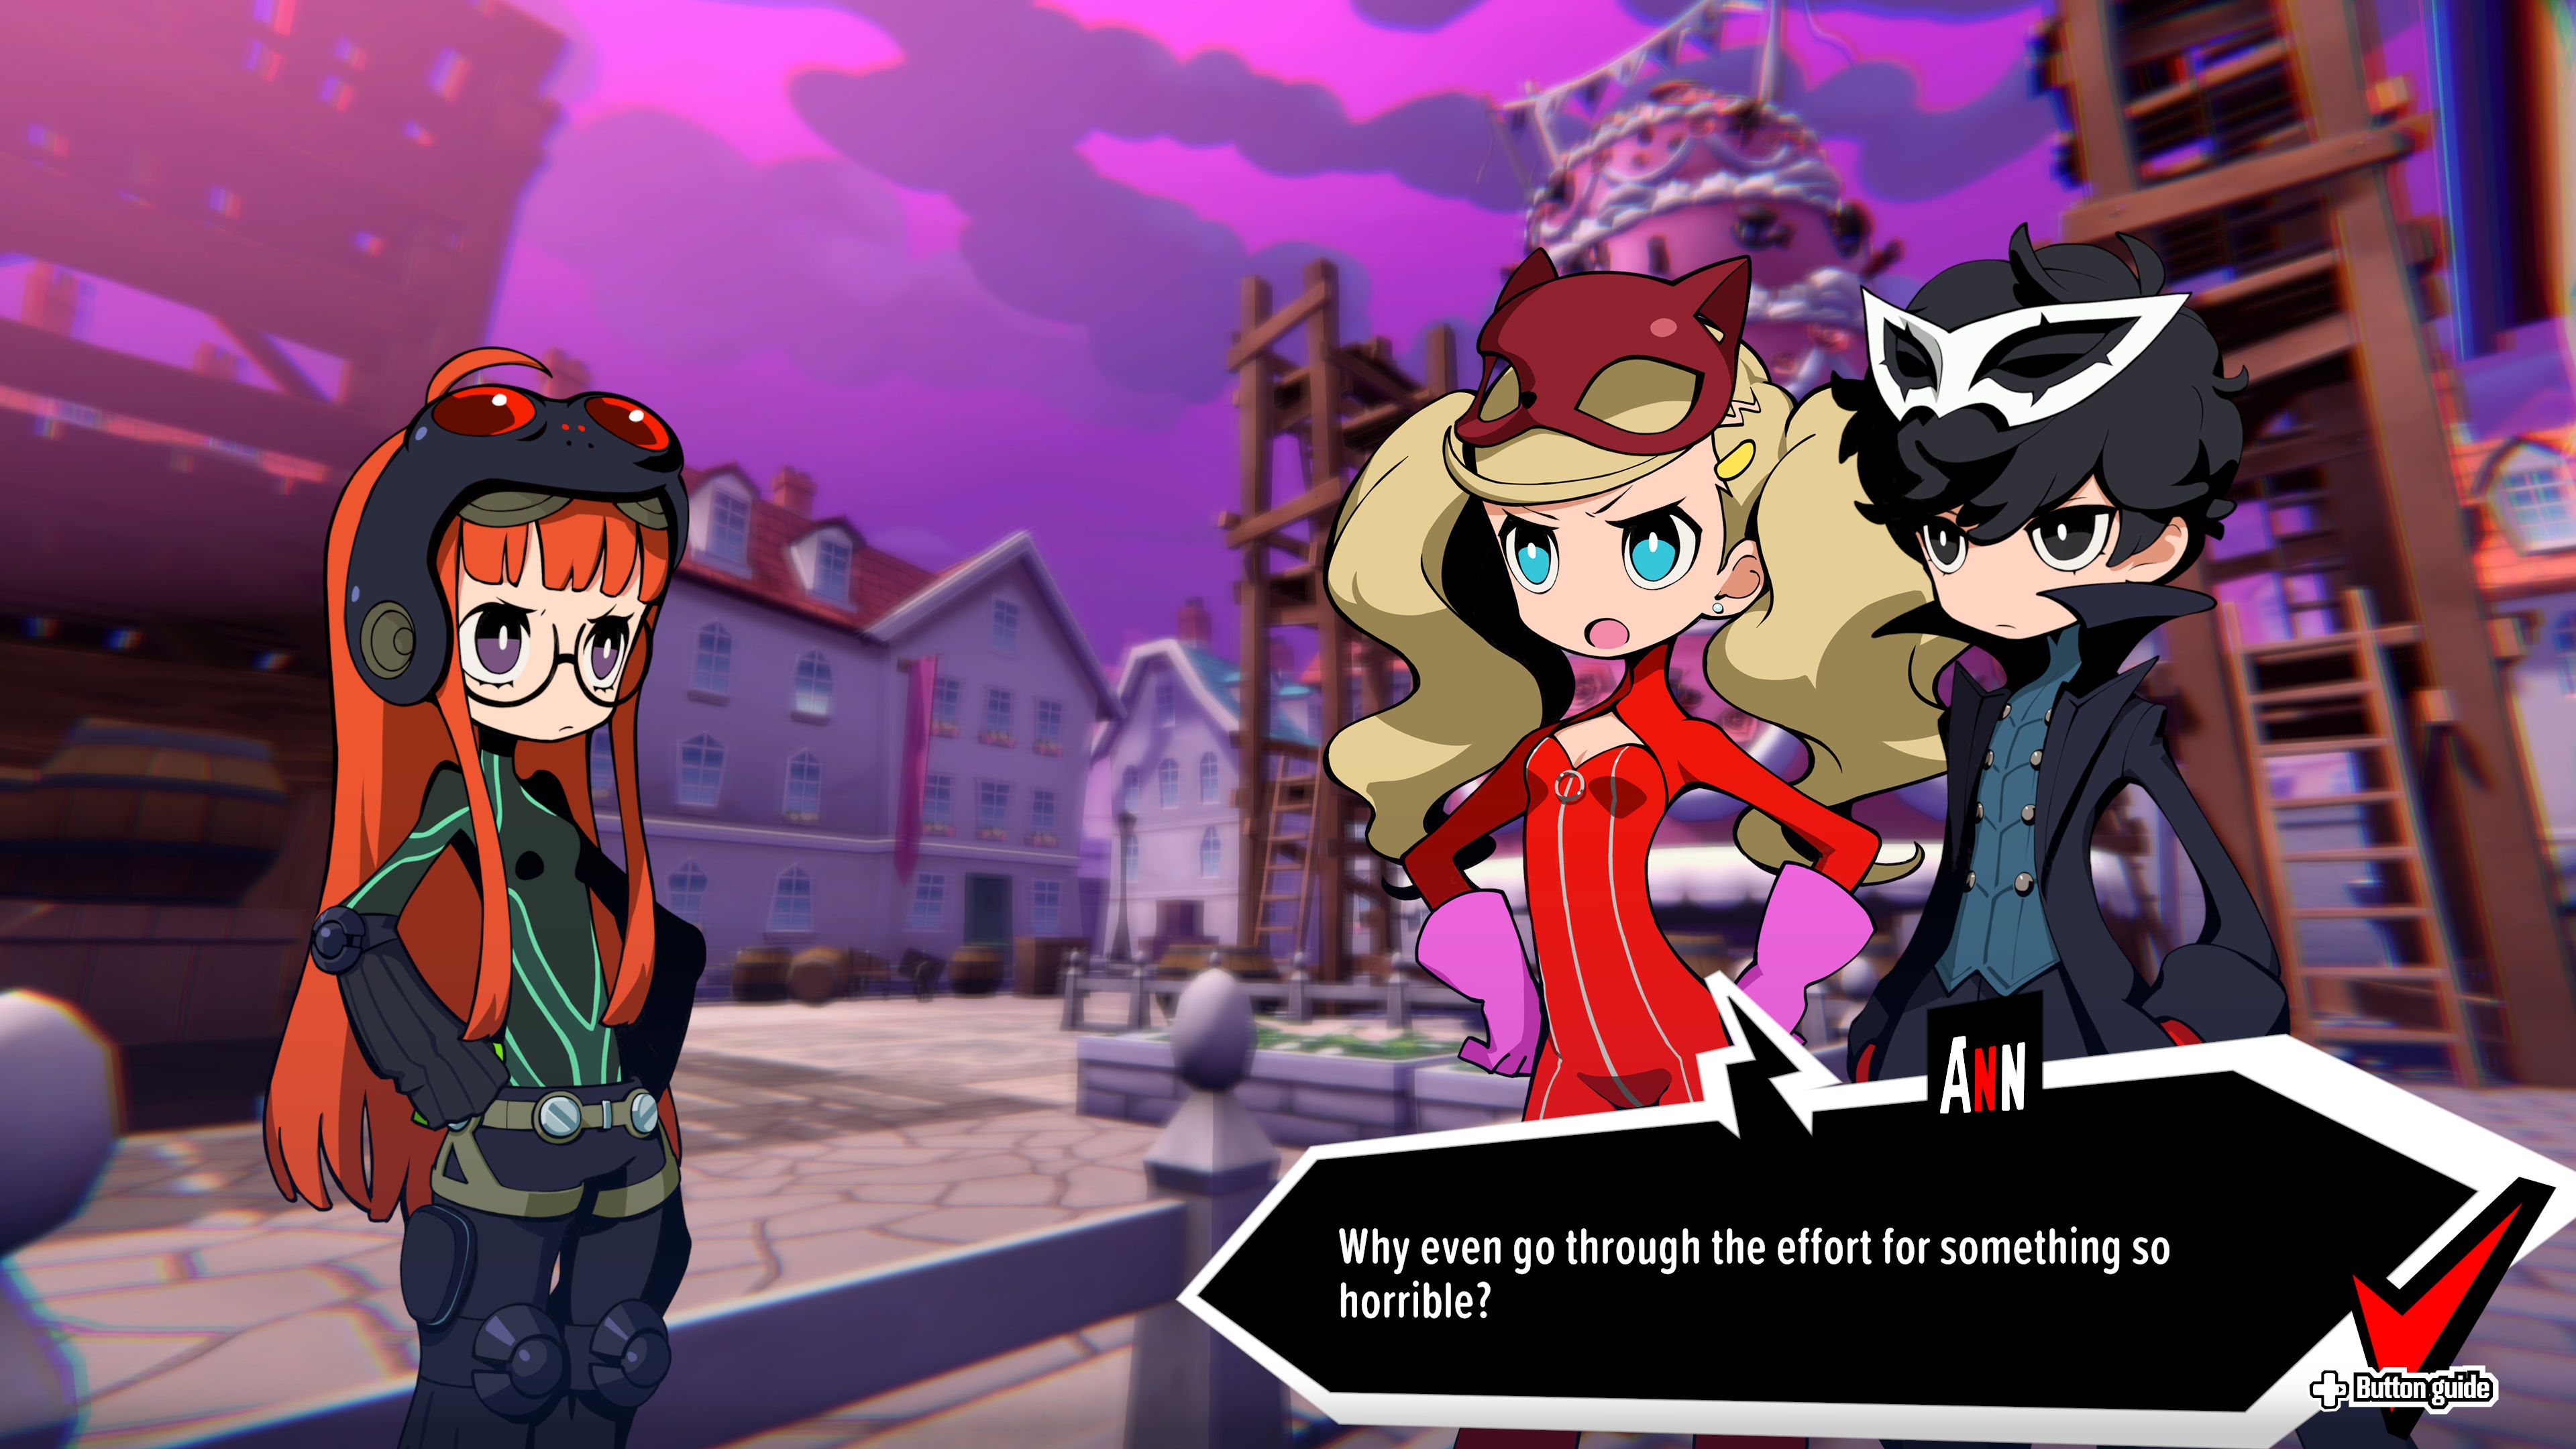 DavidCast JRPGs on X: Reviews for Persona 5 Tactica are now OUT